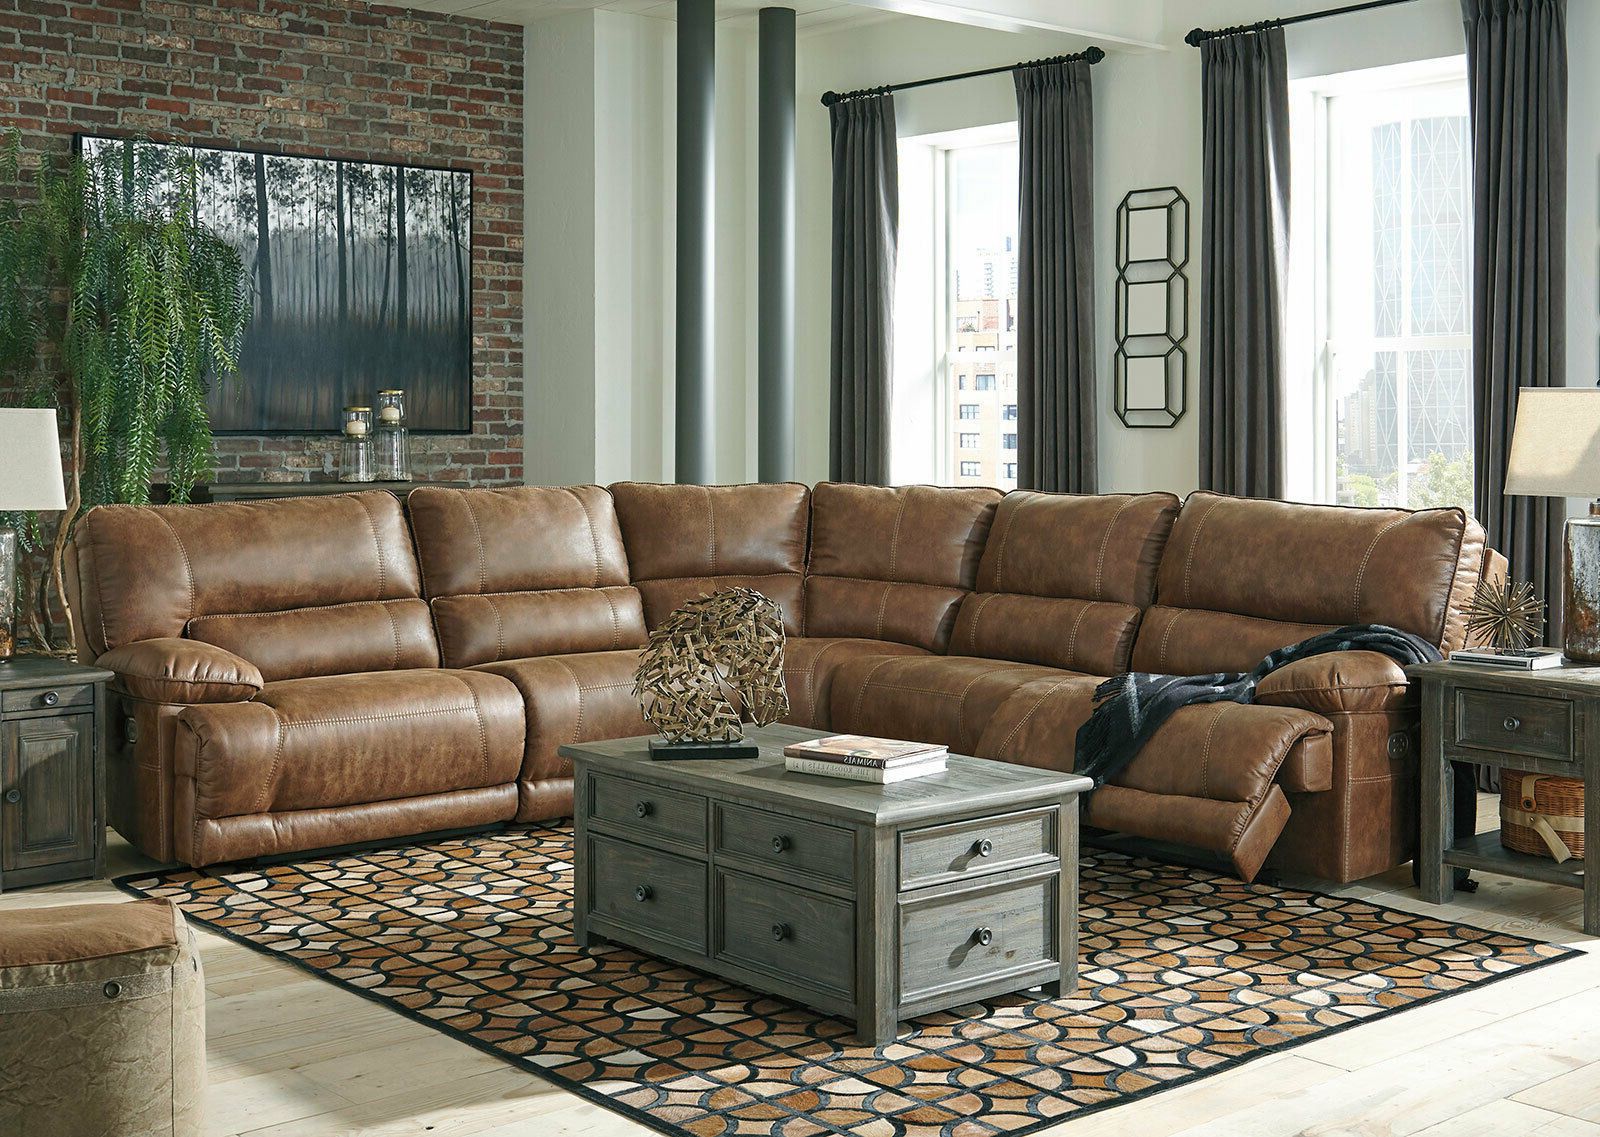 Most Recently Released Faux Leather Sofas In Dark Brown Inside Hamburg 5pcs Sectional Living Room Brown Faux Leather Power Reclining (View 7 of 15)